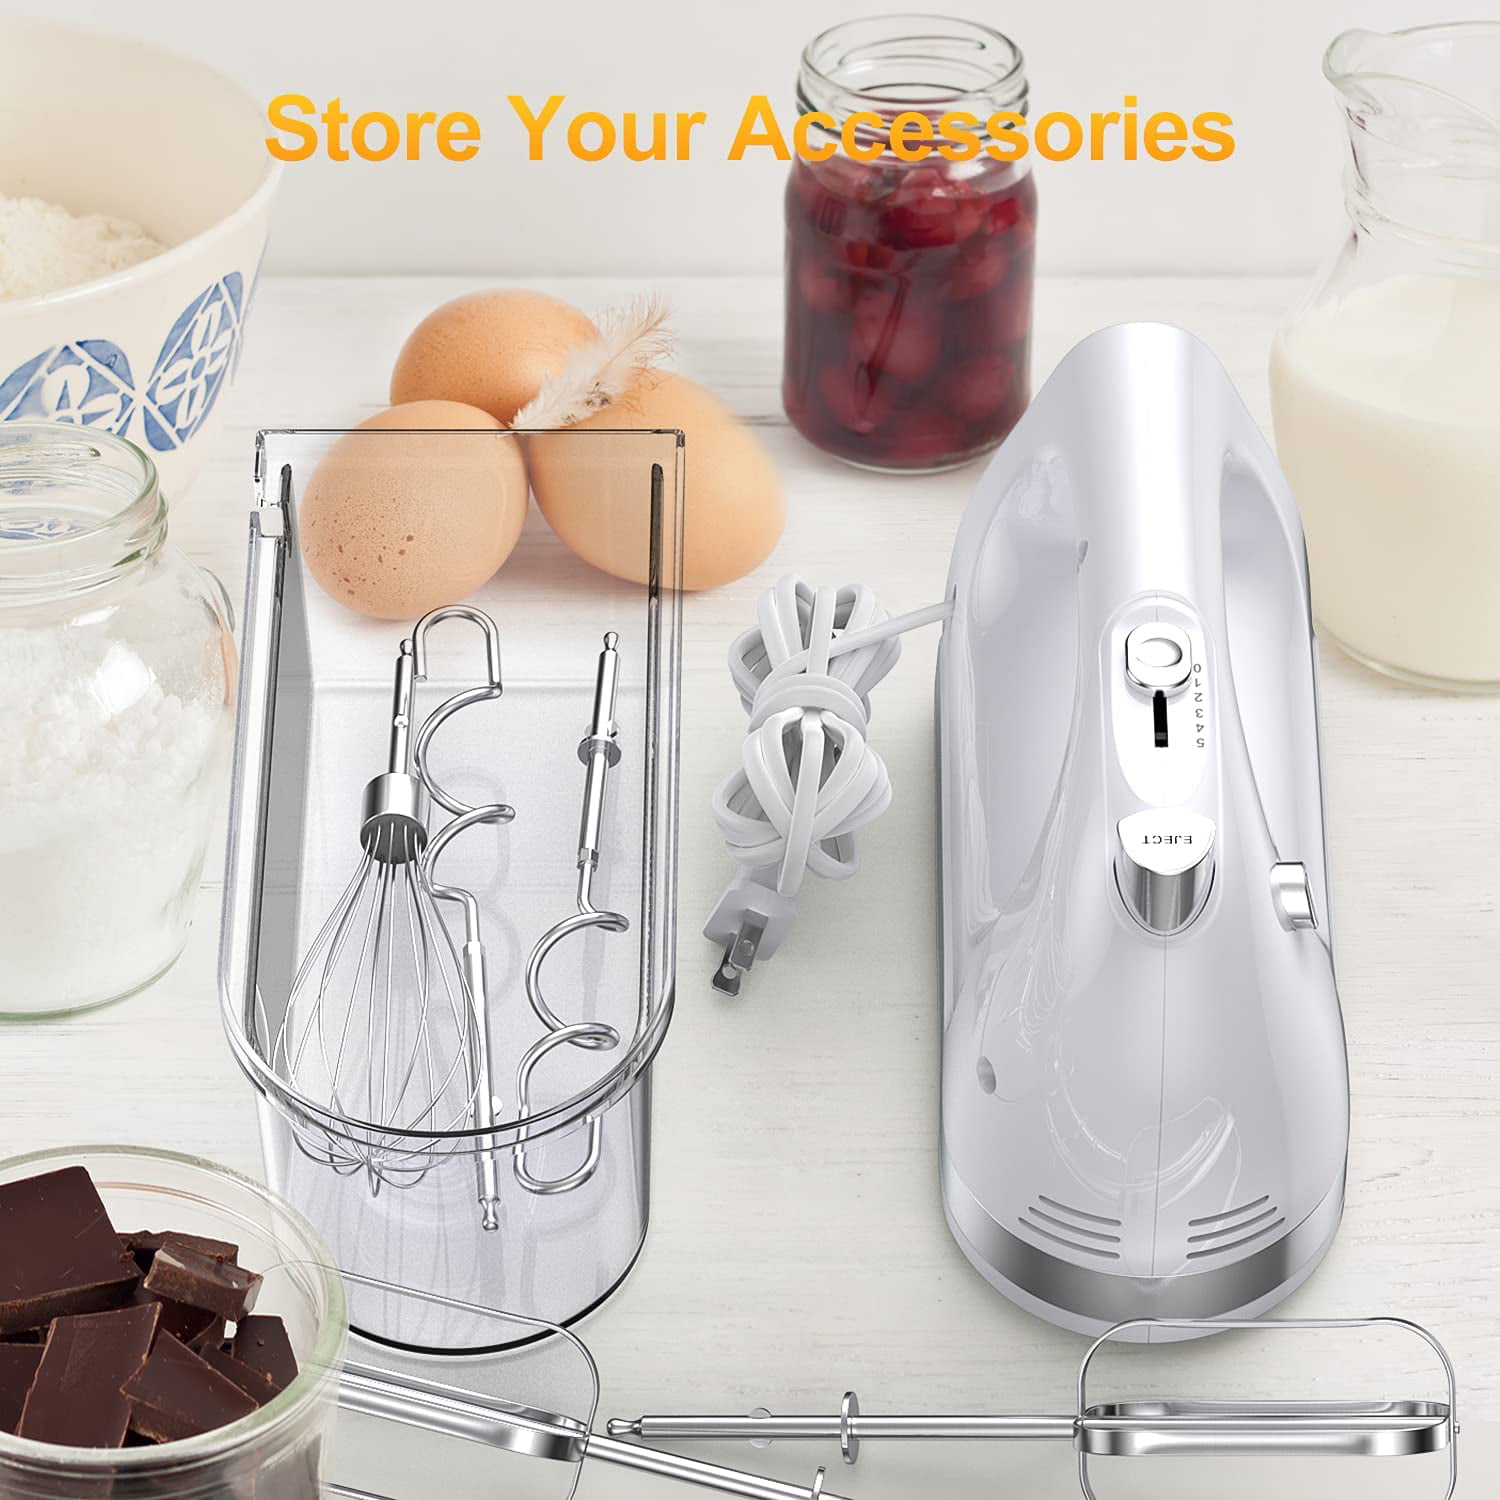 Hand Mixer Electric, 450W Kitchen Mixers with Scale Cup Storage Case, Turbo  Boost/Self-Control Speed + 5 Speed + Eject Button + 5 Stainless Steel